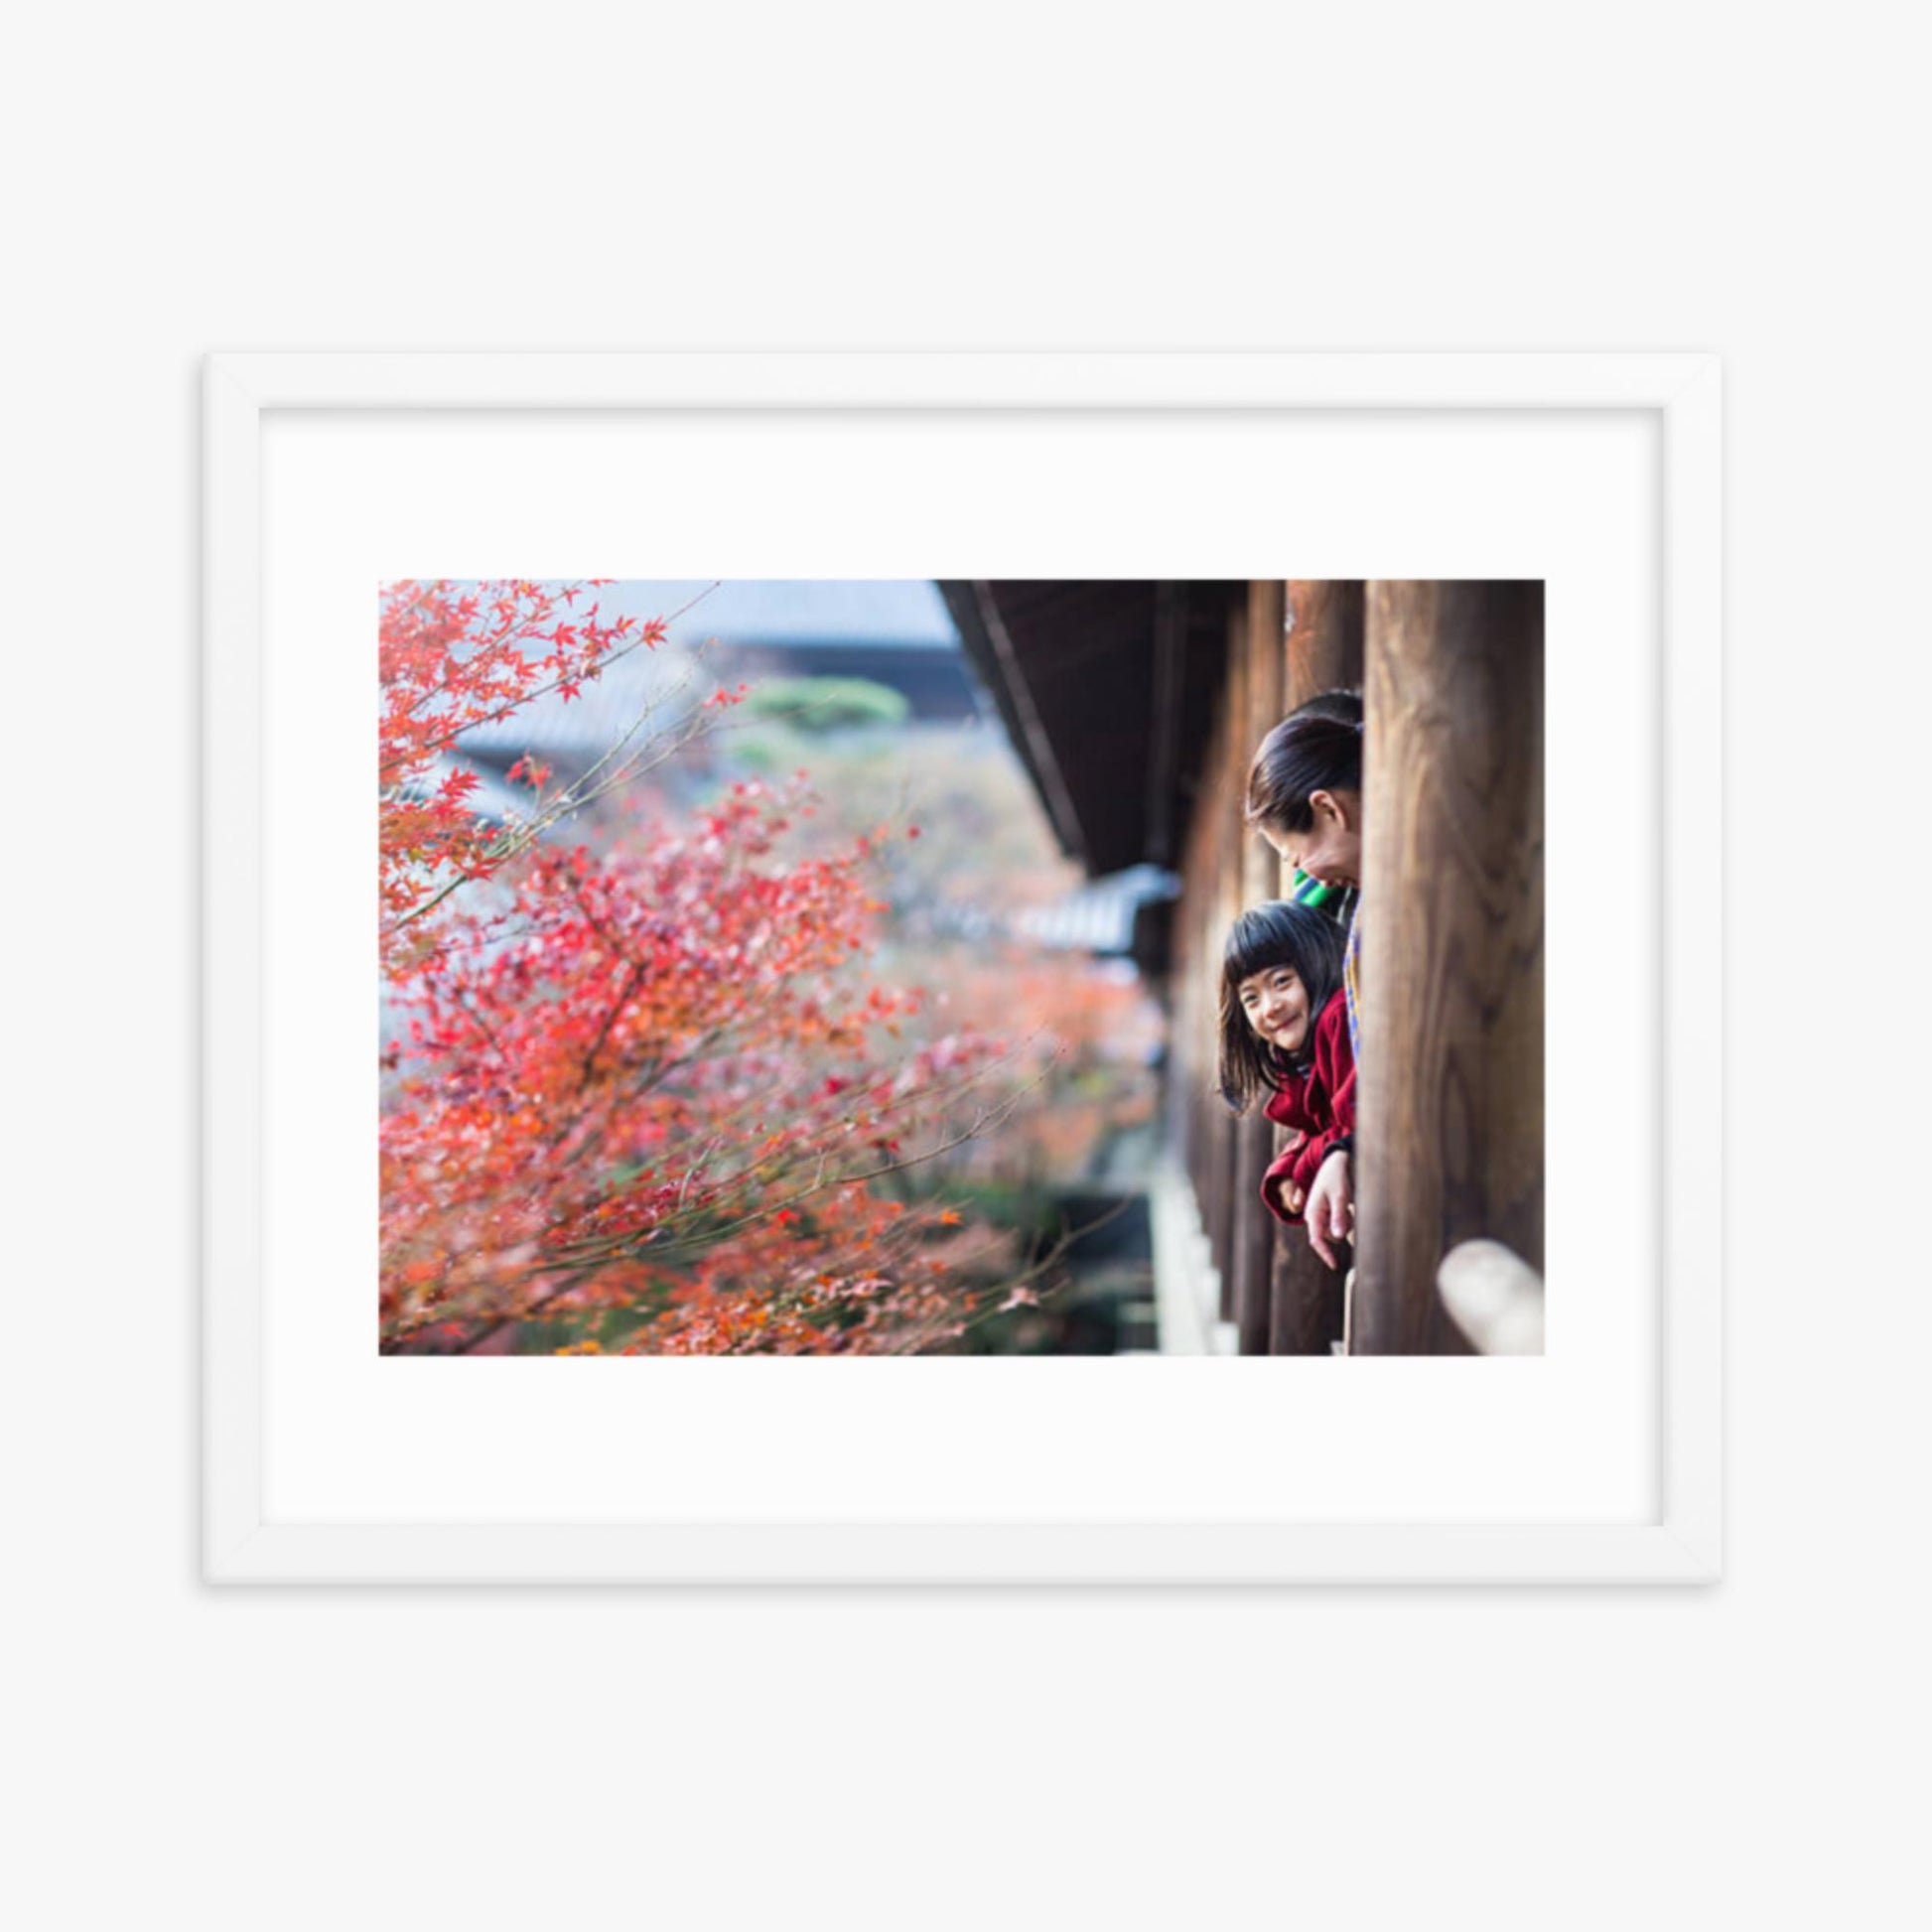 Father, mother and daughter at a temple enjoying autumn leaves 16x20 in Poster With White Frame